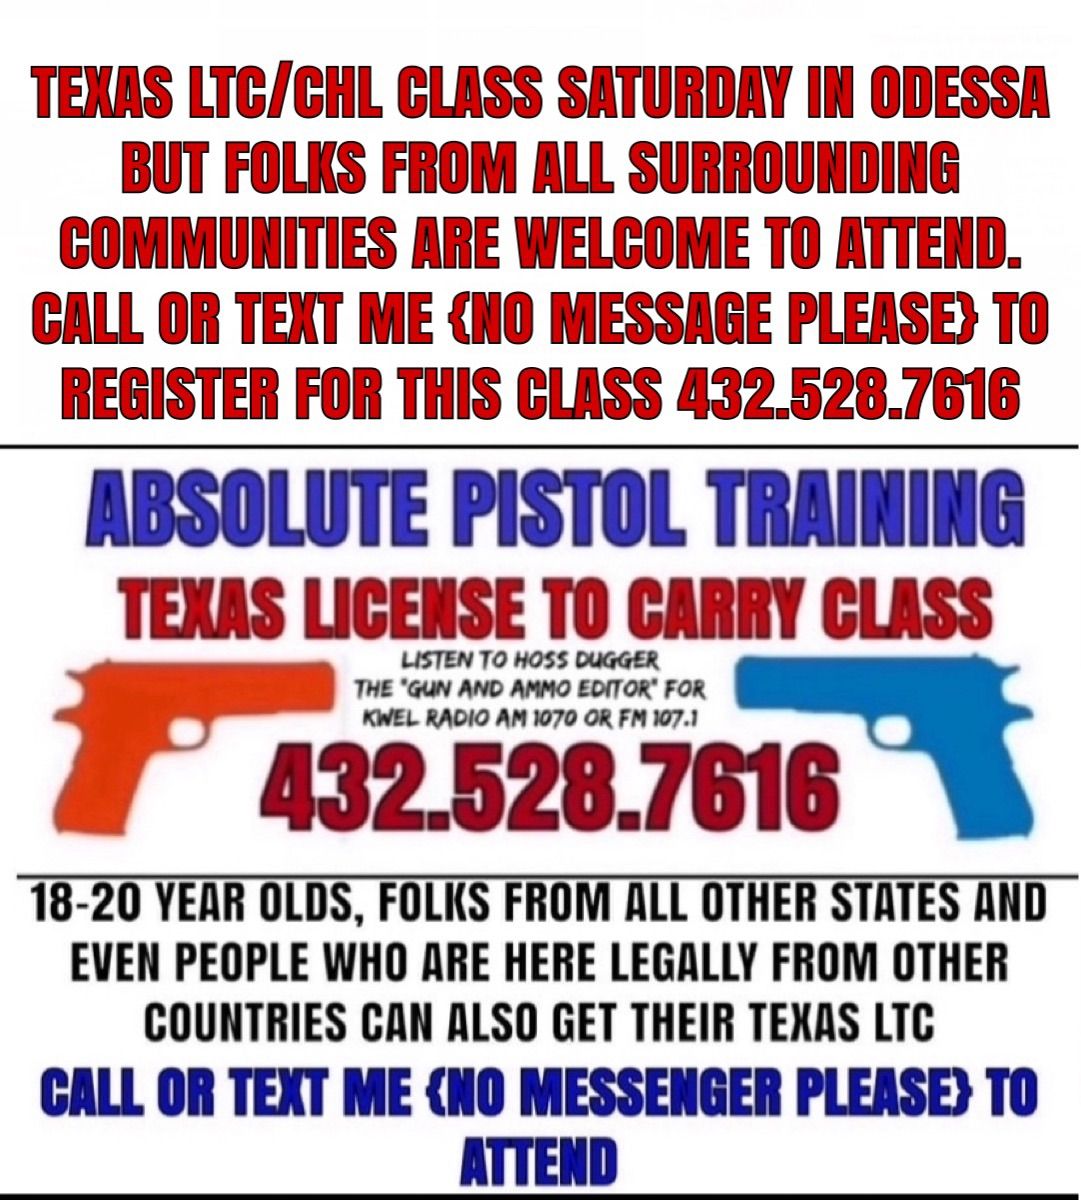 Texas LTC\/CHL Class Saturday May 4 in Odessa but everyone welcome to attend 